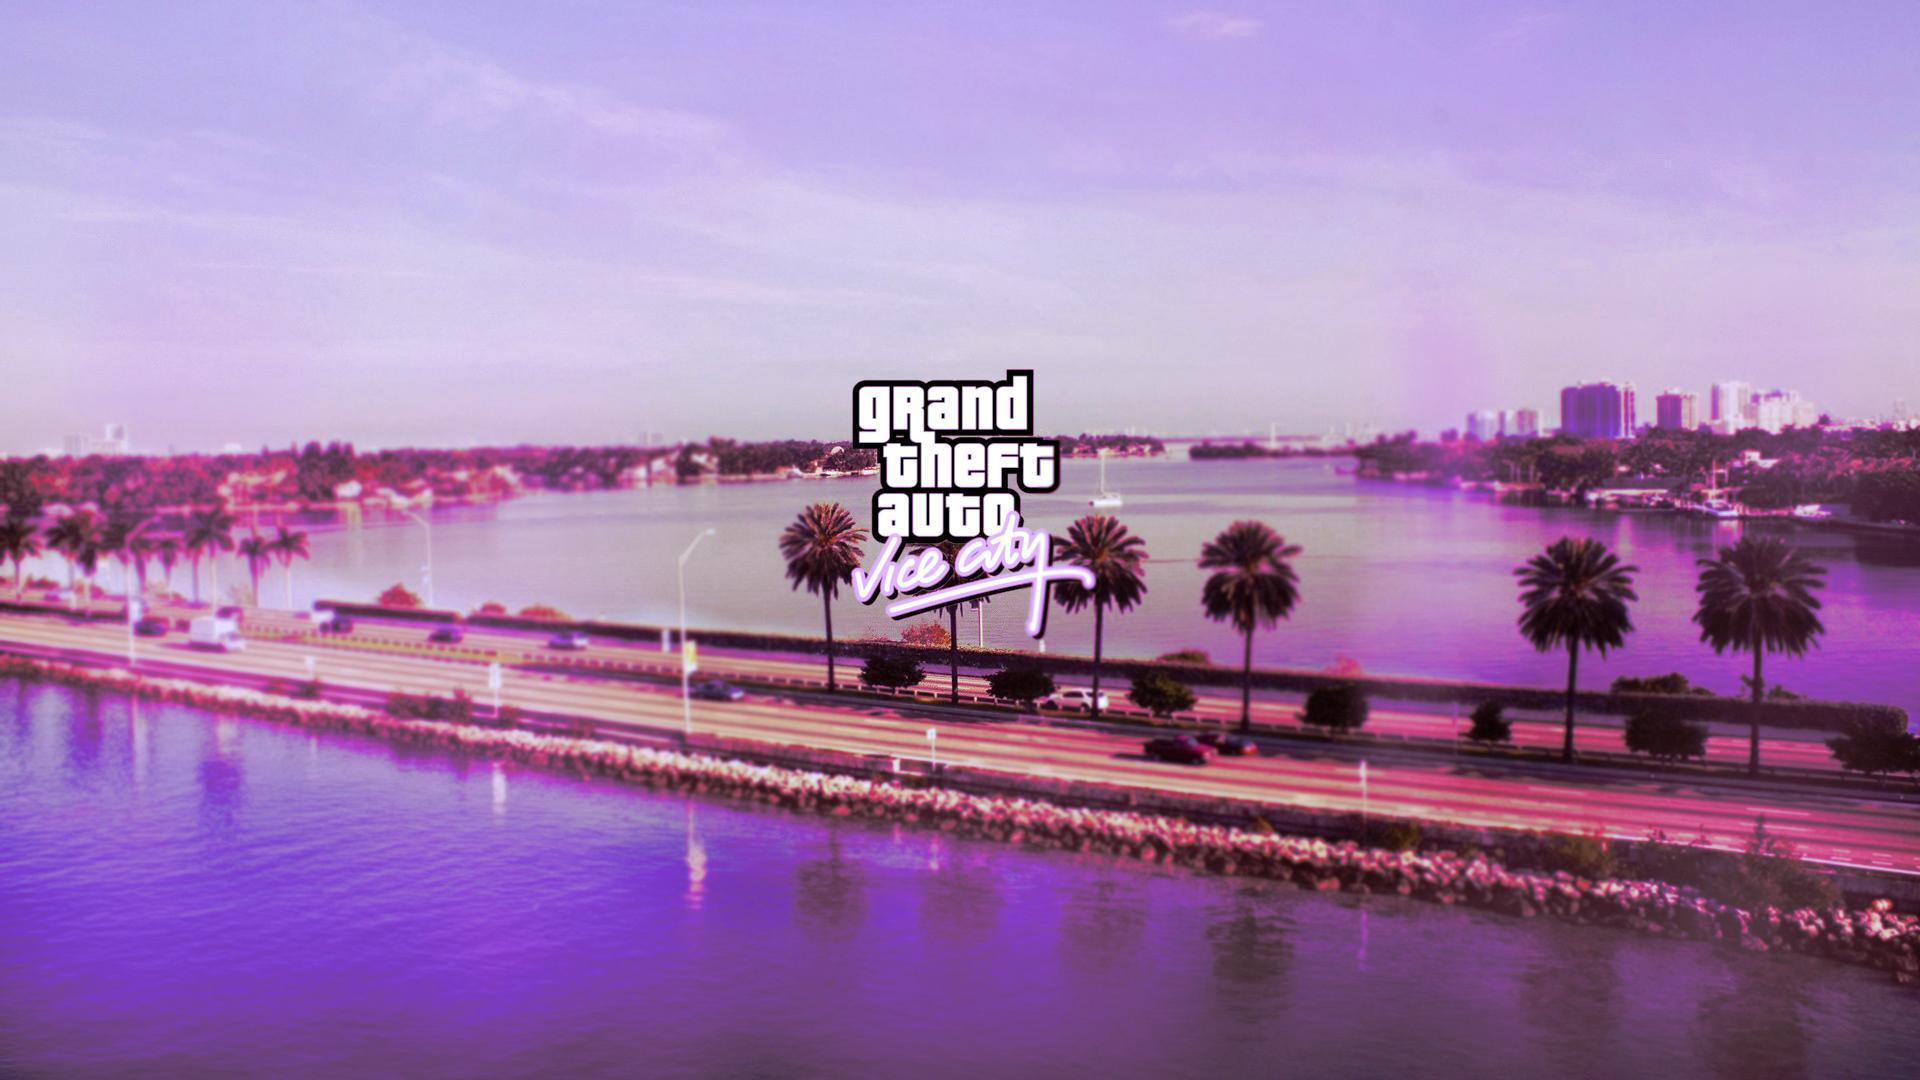 I made a GTA VC wallpaper for my friend though I'd share it here